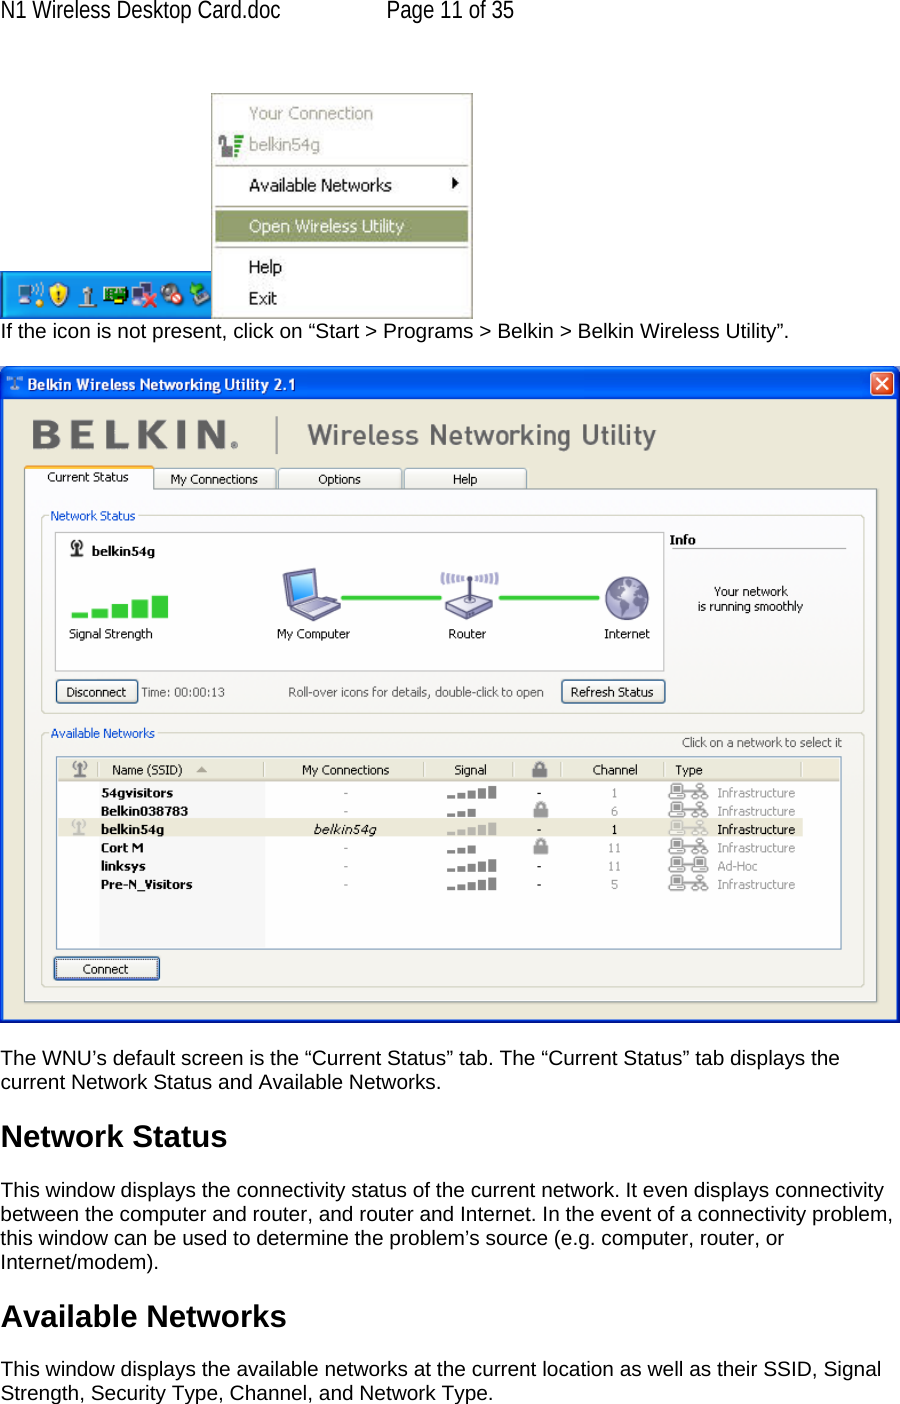 N1 Wireless Desktop Card.doc  Page 11 of 35   If the icon is not present, click on “Start &gt; Programs &gt; Belkin &gt; Belkin Wireless Utility”.    The WNU’s default screen is the “Current Status” tab. The “Current Status” tab displays the current Network Status and Available Networks.  Network Status  This window displays the connectivity status of the current network. It even displays connectivity between the computer and router, and router and Internet. In the event of a connectivity problem, this window can be used to determine the problem’s source (e.g. computer, router, or Internet/modem).  Available Networks  This window displays the available networks at the current location as well as their SSID, Signal Strength, Security Type, Channel, and Network Type. 